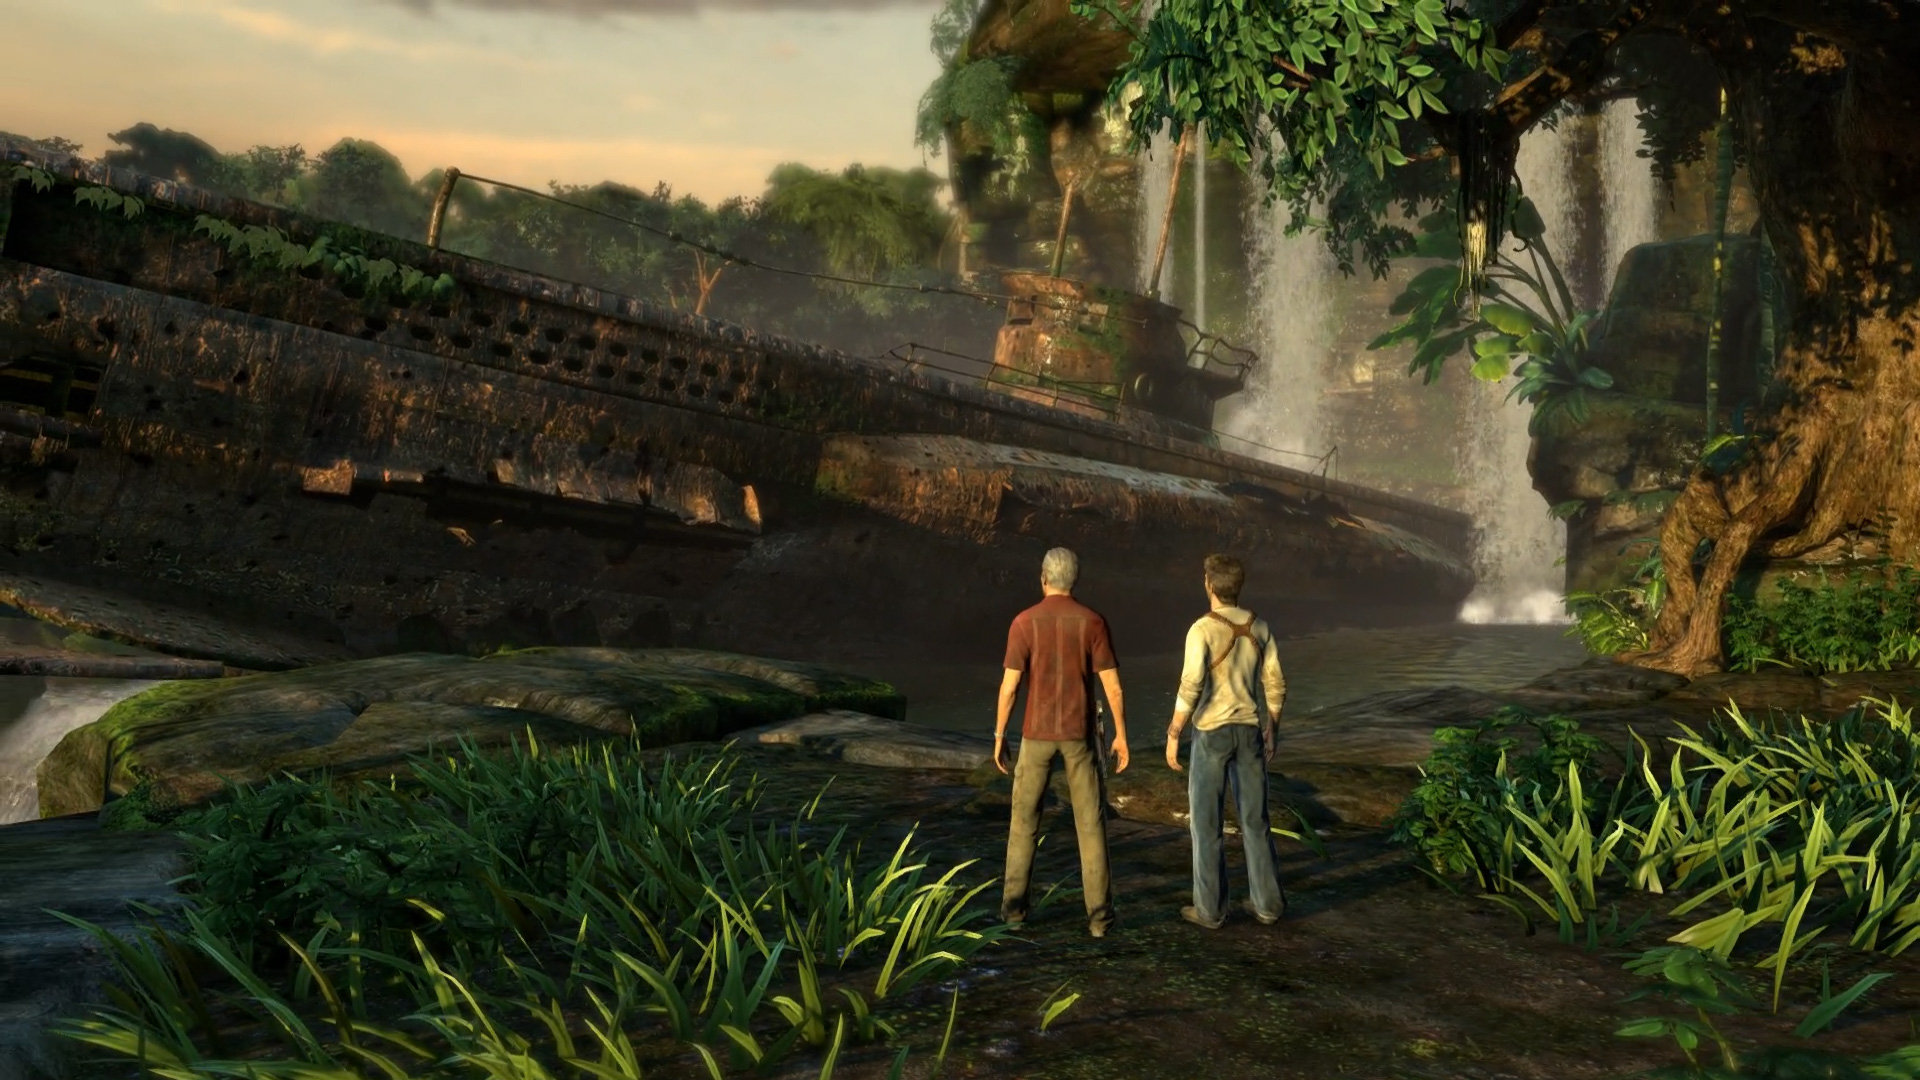 uncharted-drakes-fortune-remastered-screen-02-ps4-eu-28sep16.jpg